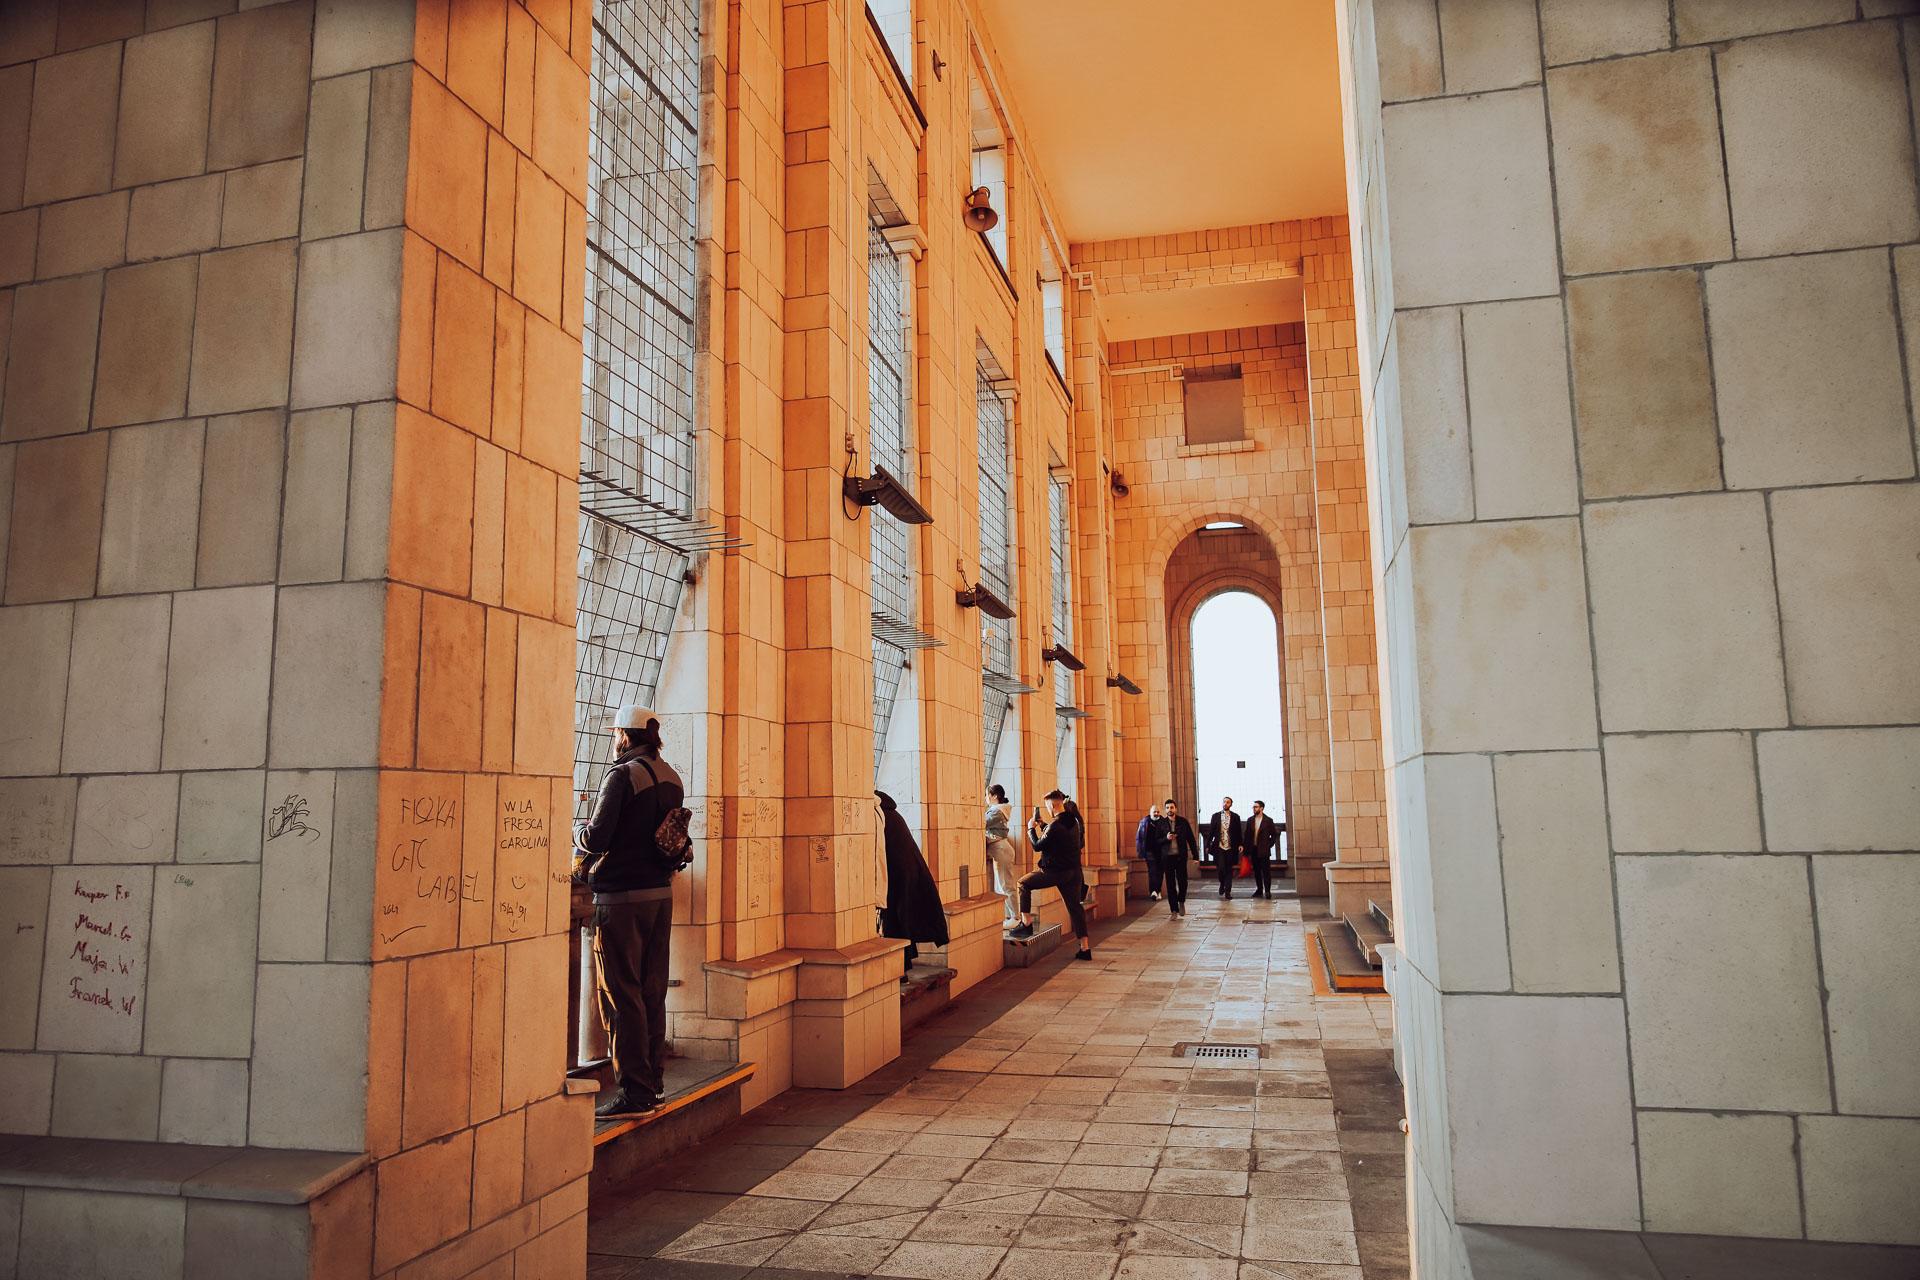 A corridor of the observation terrace on the 30th floor of the Palace of Culture and Science in Warsaw, Poland. High ceiling archways filled with evening light with a few visitors enjoying the view.